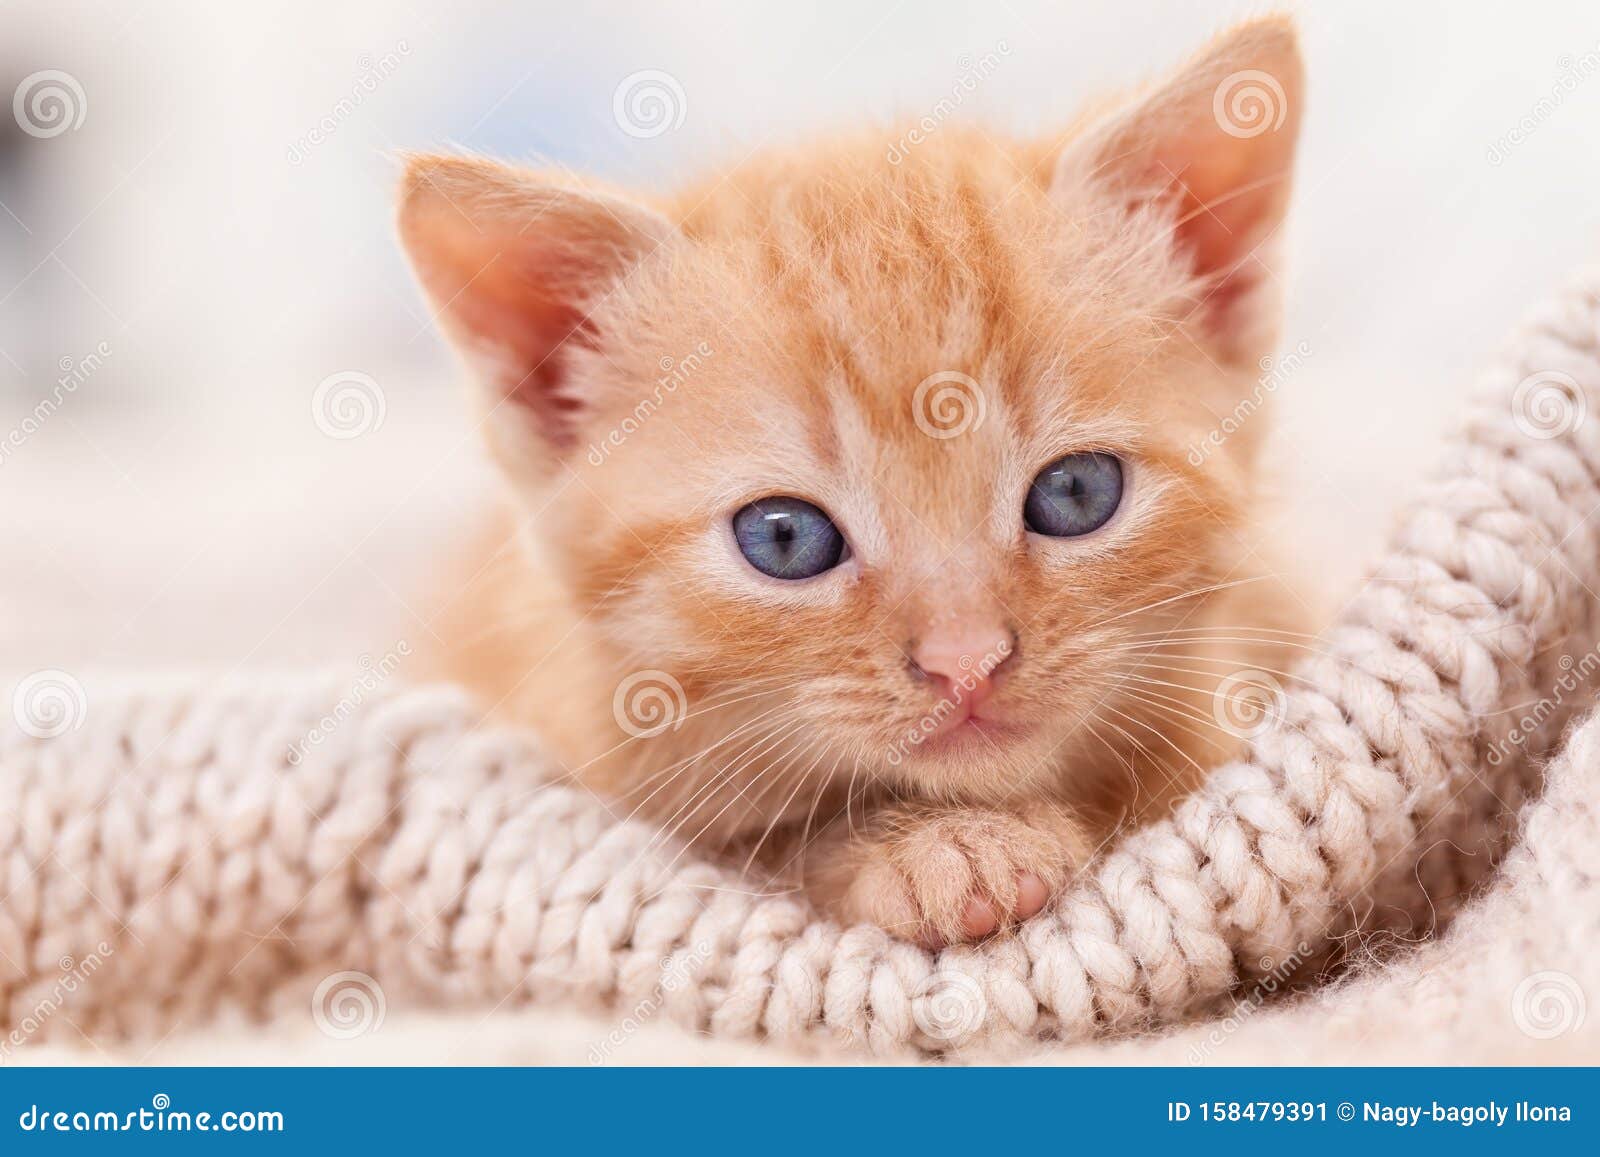 Cute Ginger Kitten Looking in the Camera - Close Up Stock Image ...